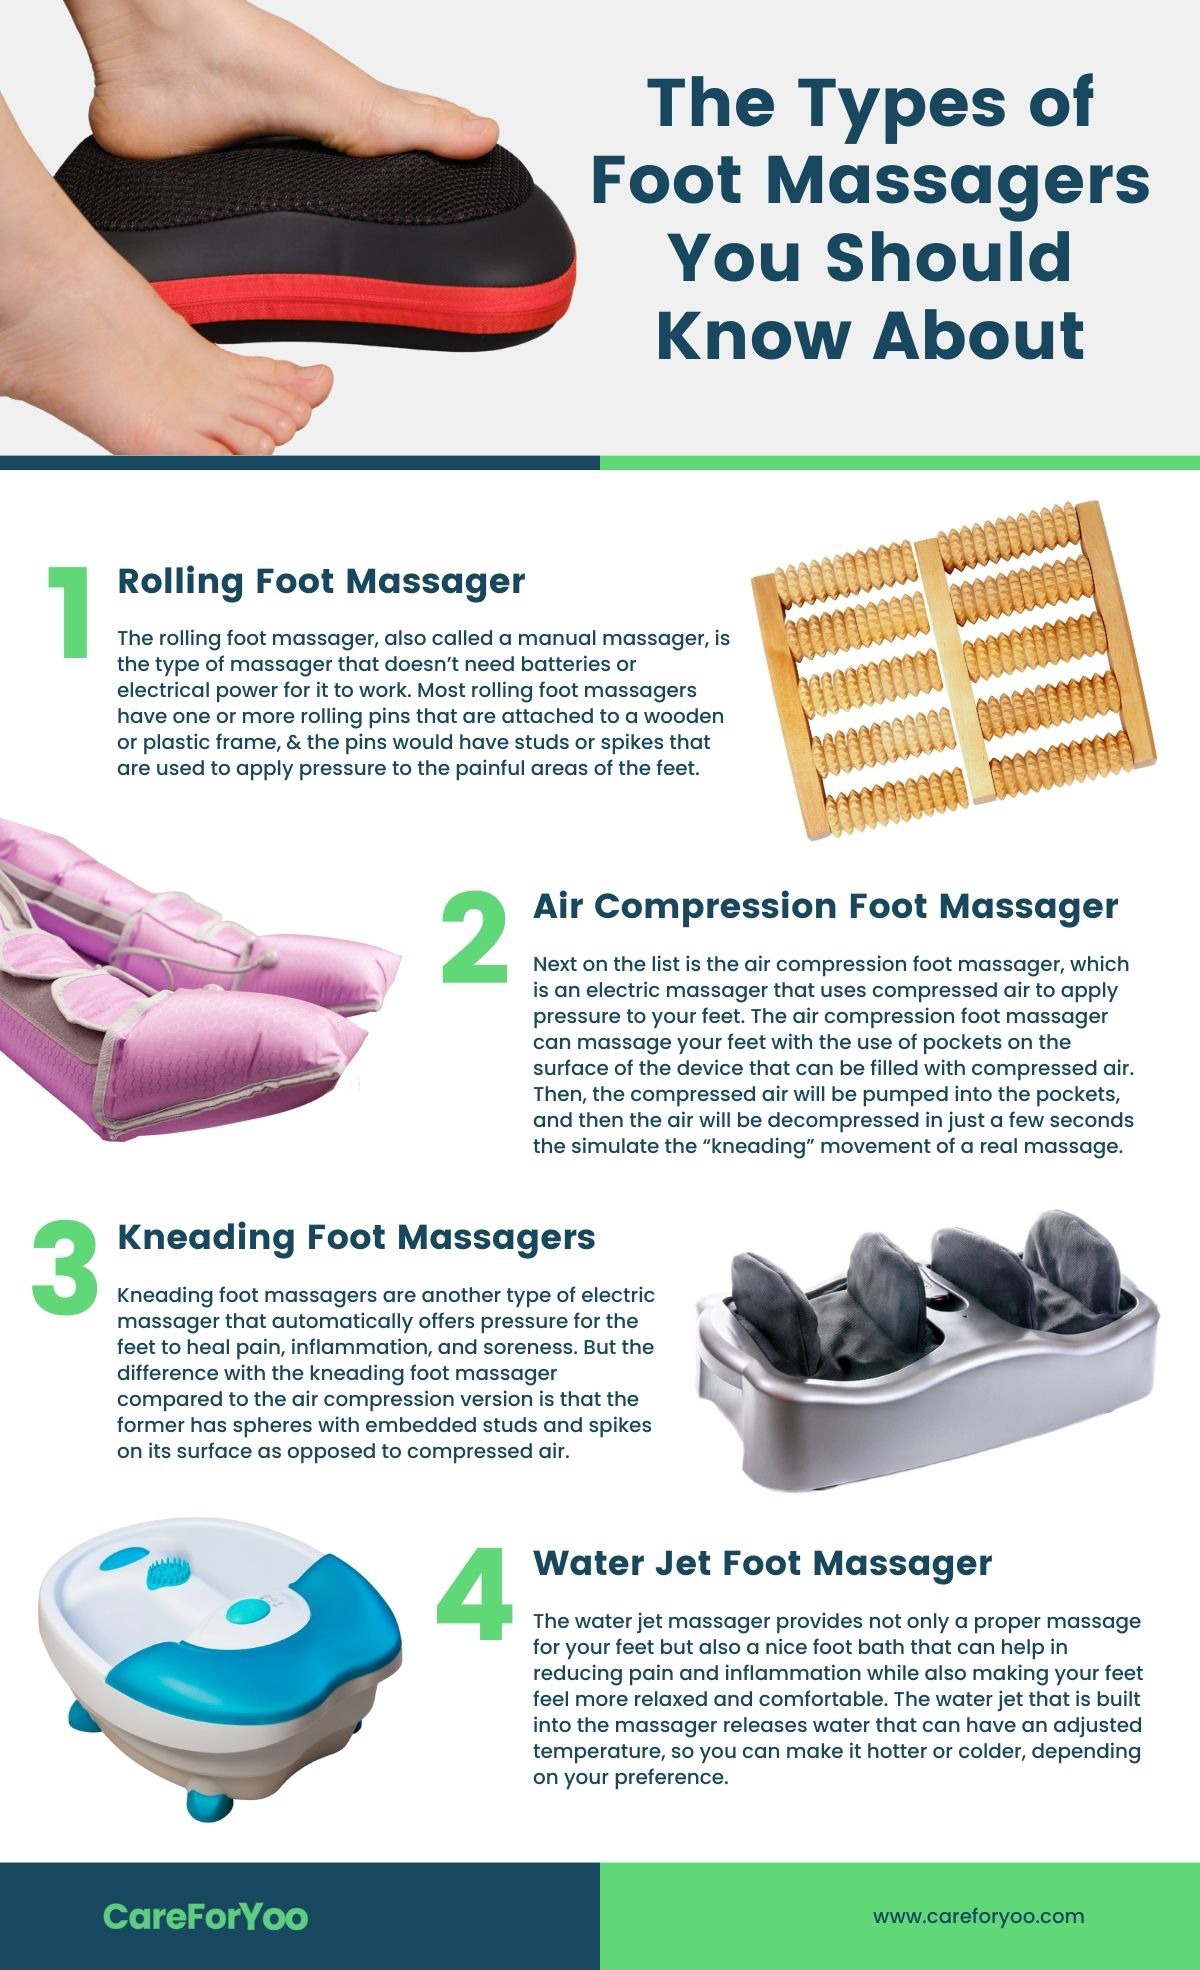 The Types of Foot Massagers You Should Know About